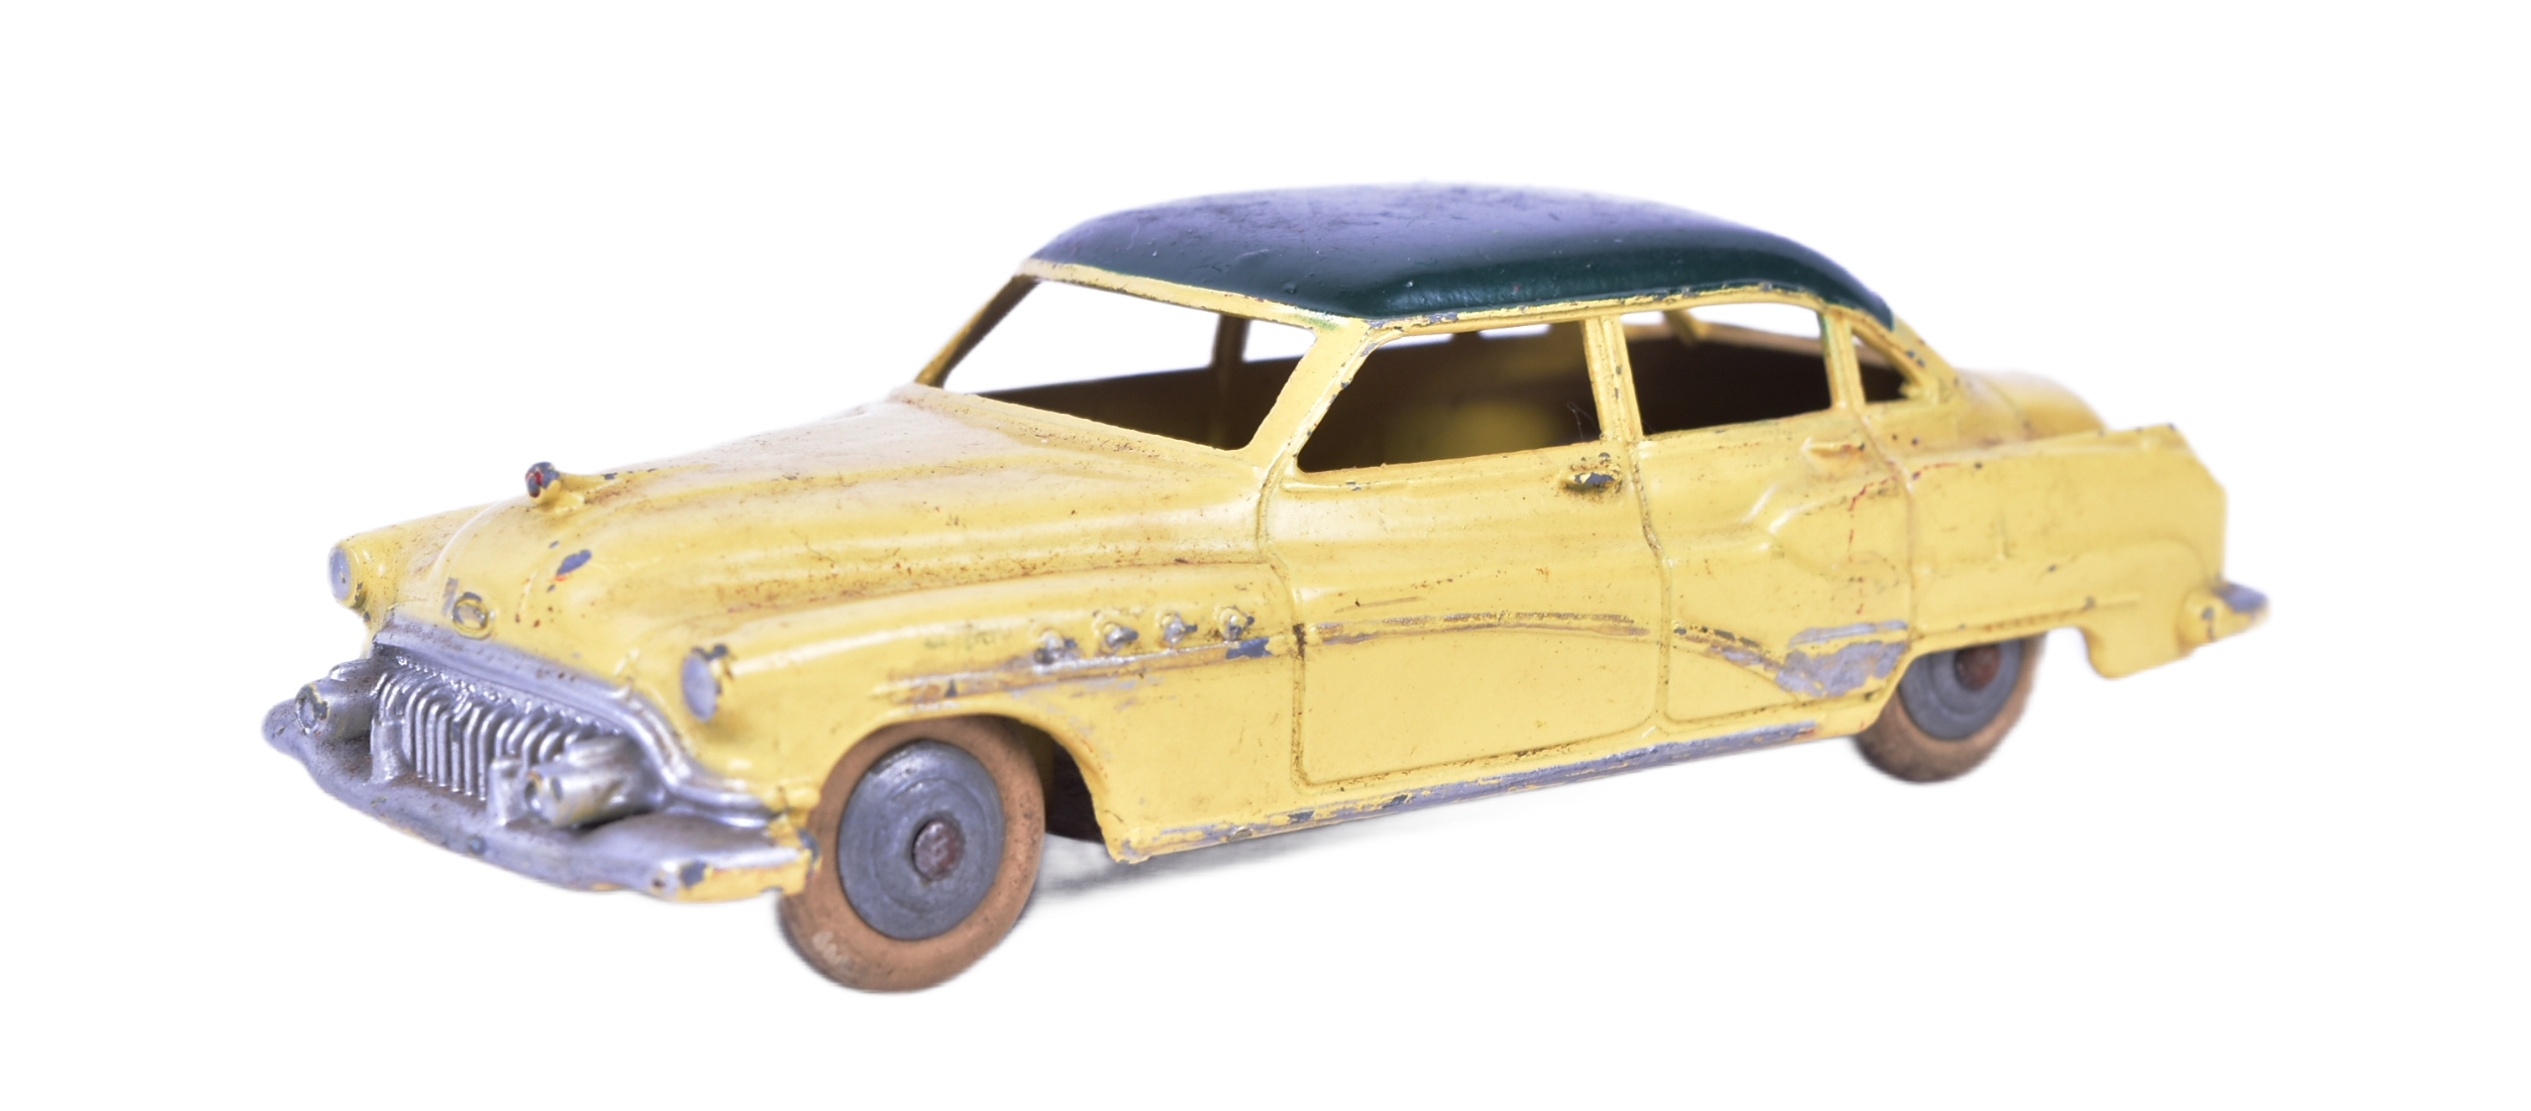 DIECAST - FRENCH DINKY TOYS - BUICK ROASMASTER